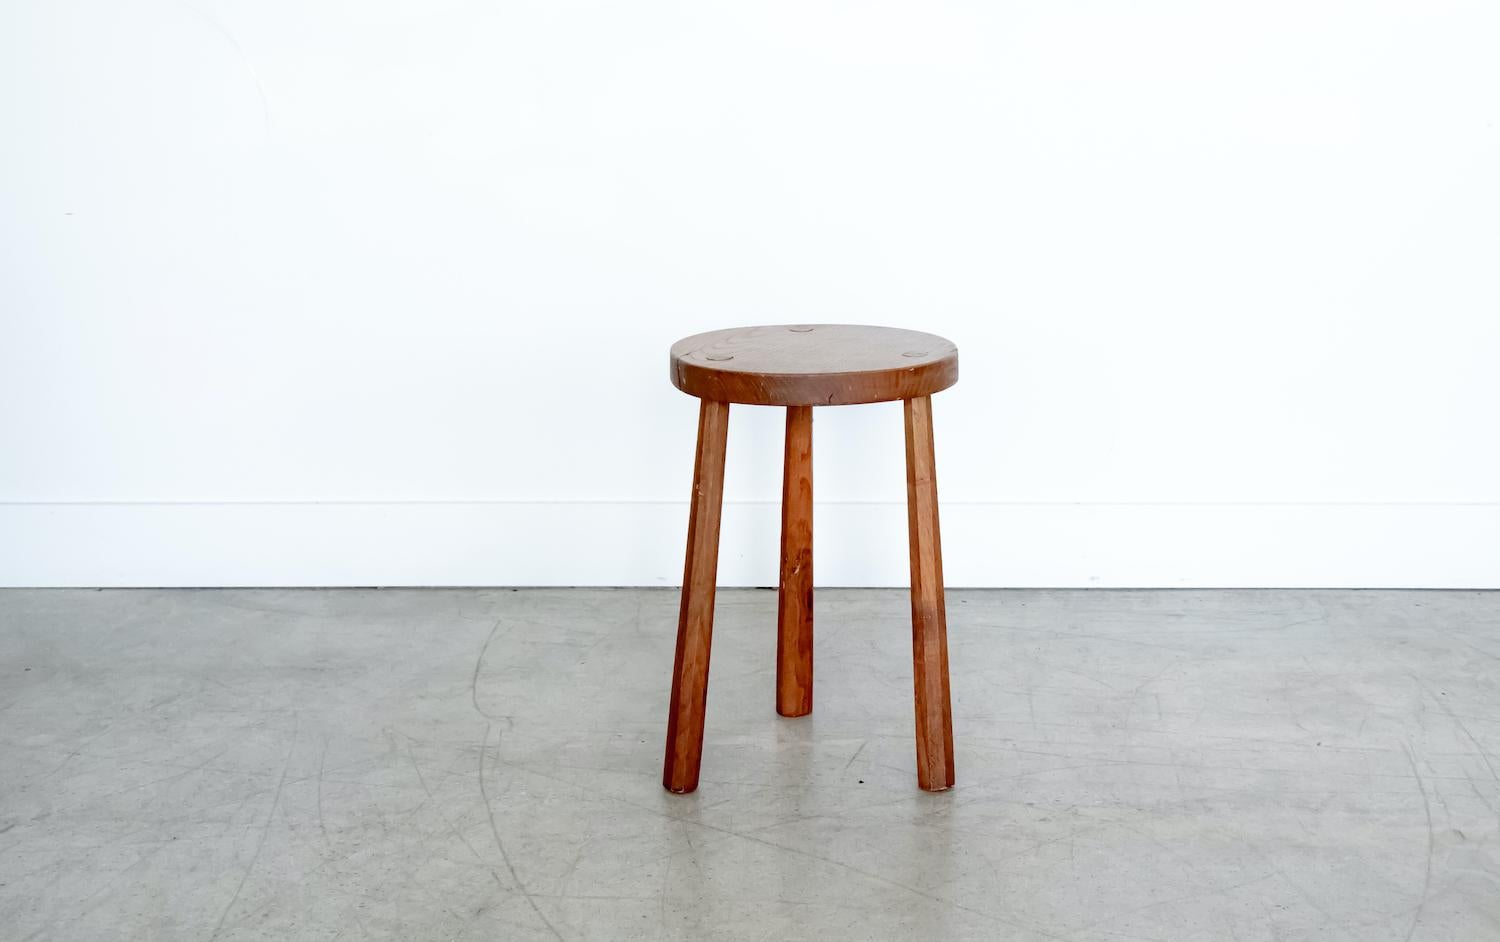 Vintage circular wood stool with tripod legs from France. Original light wood finish with great age markings and patina. Can be used as a stool or as side table next to chairs. 

 